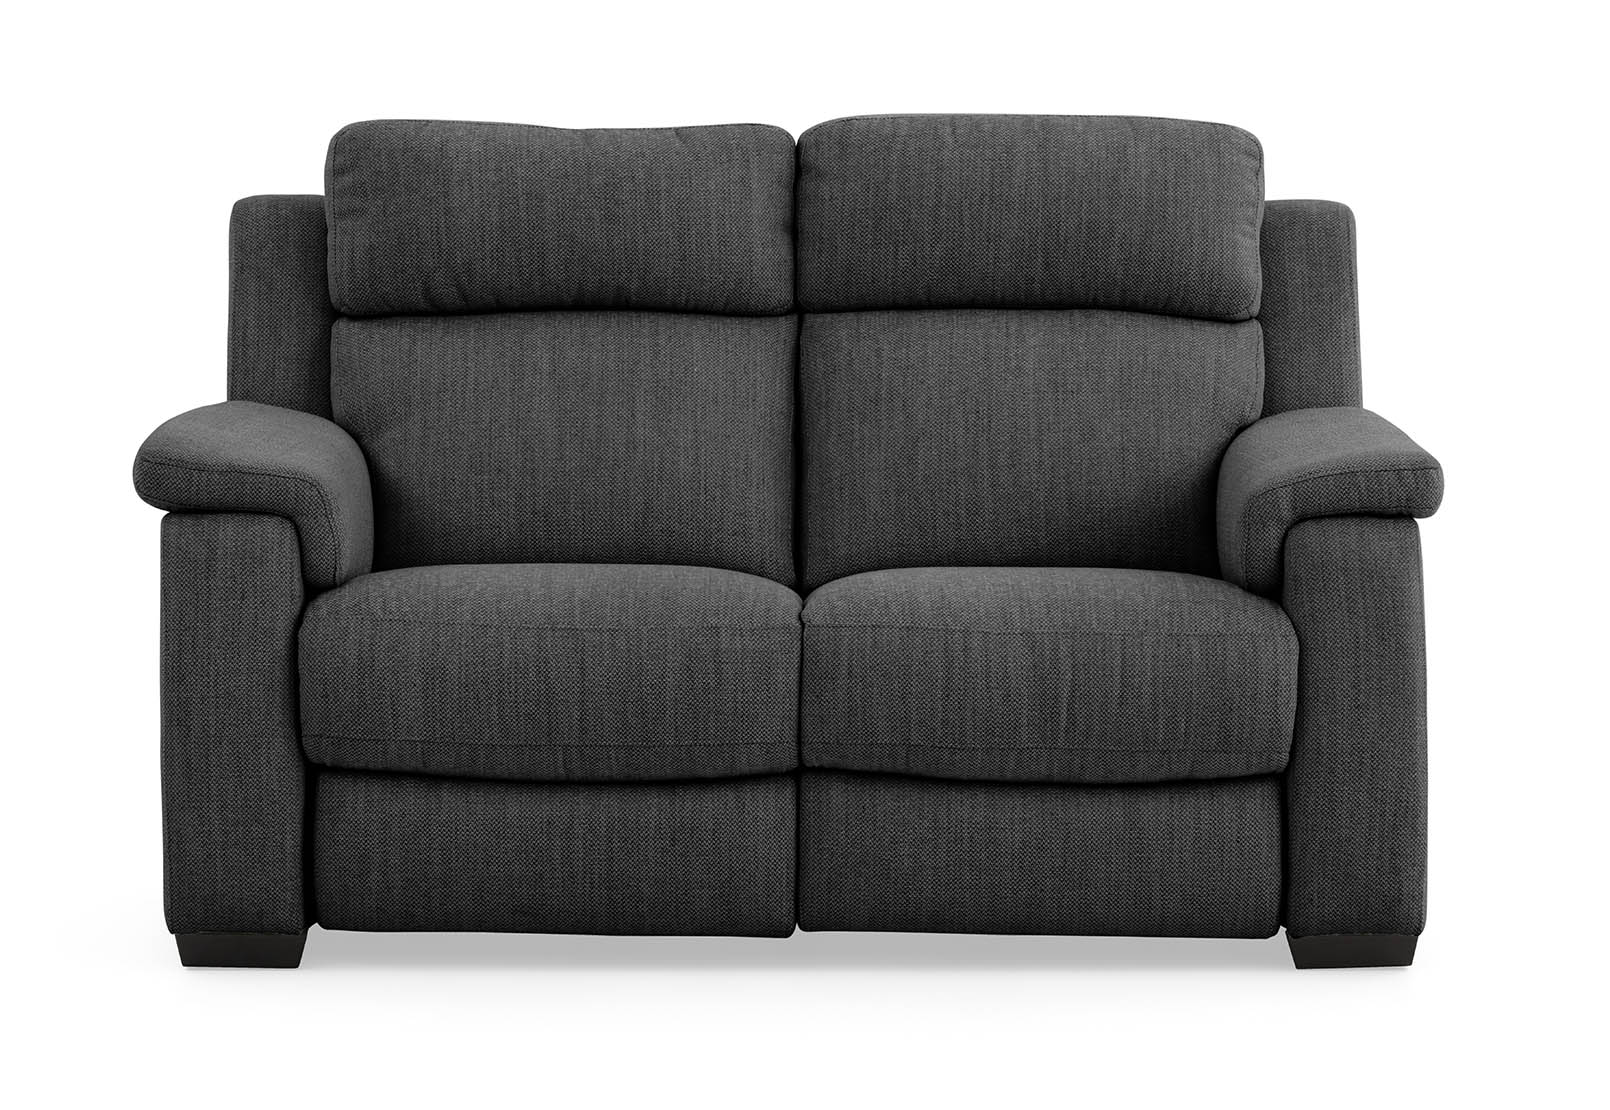 CHARCOAL CAPELLO Fabric 2 Seater Sofa with 2 Inbuilt Electric Recliners